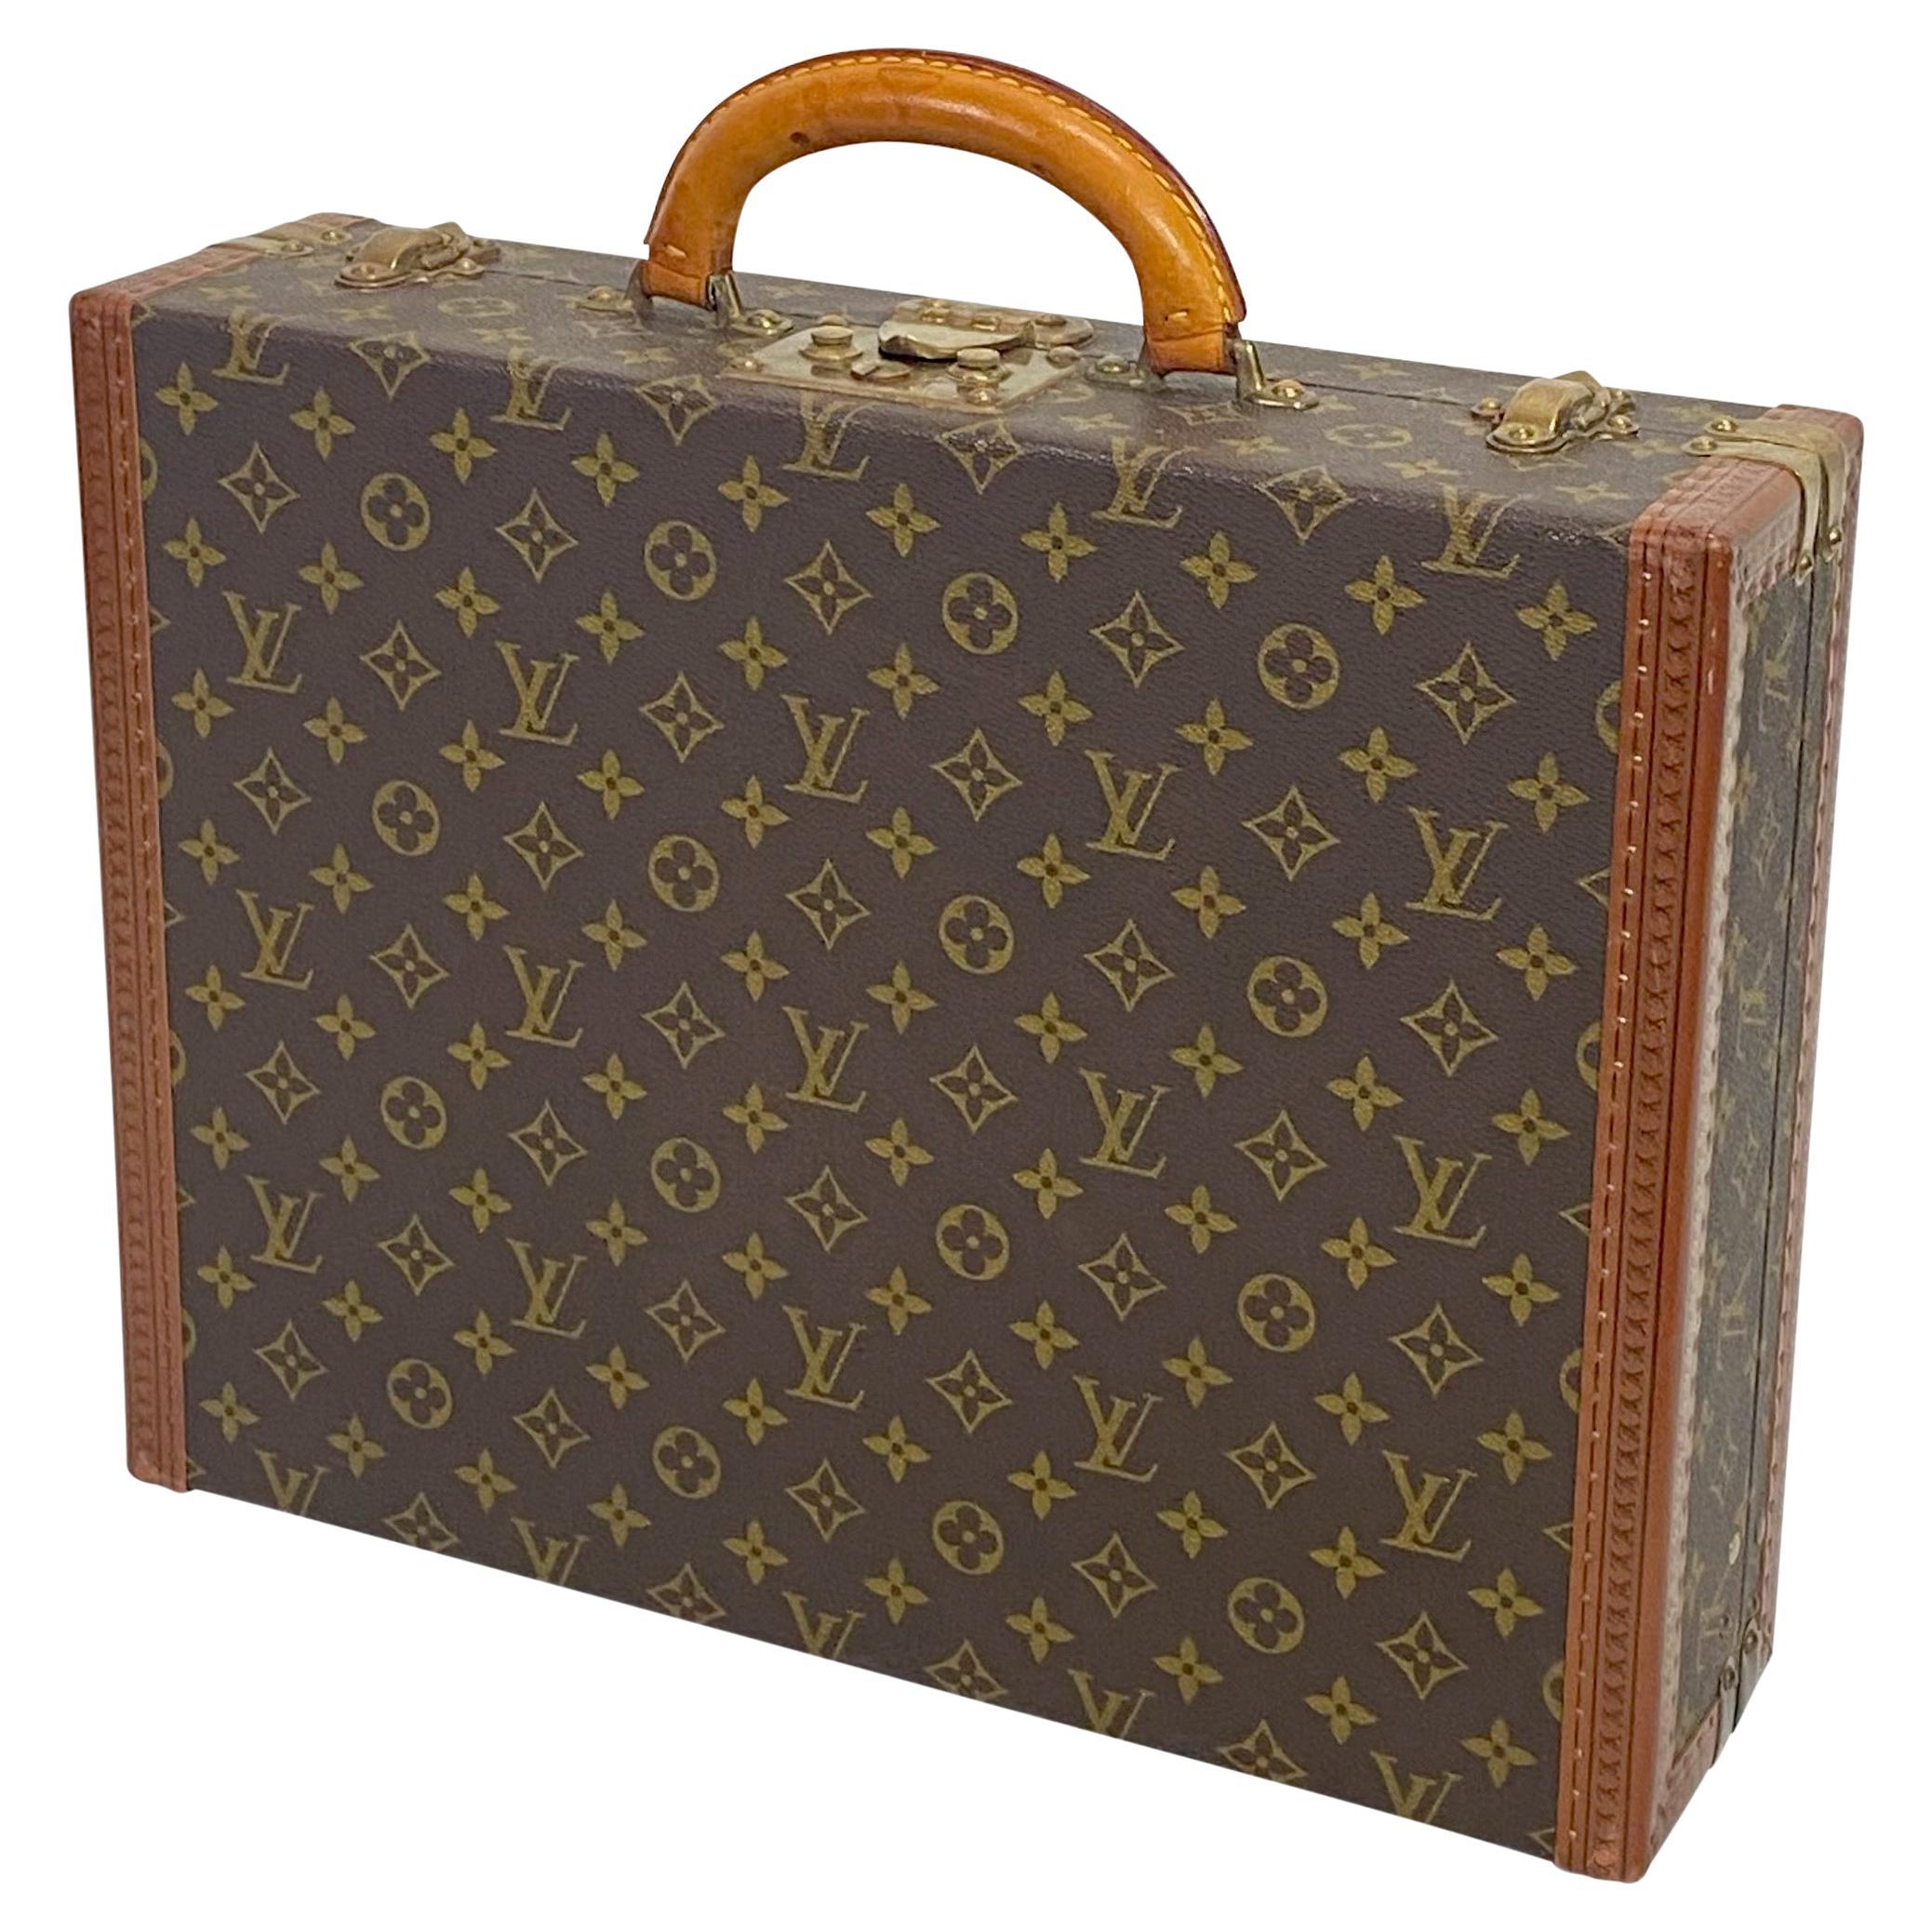 Is my Louis Vuitton suitcase real?